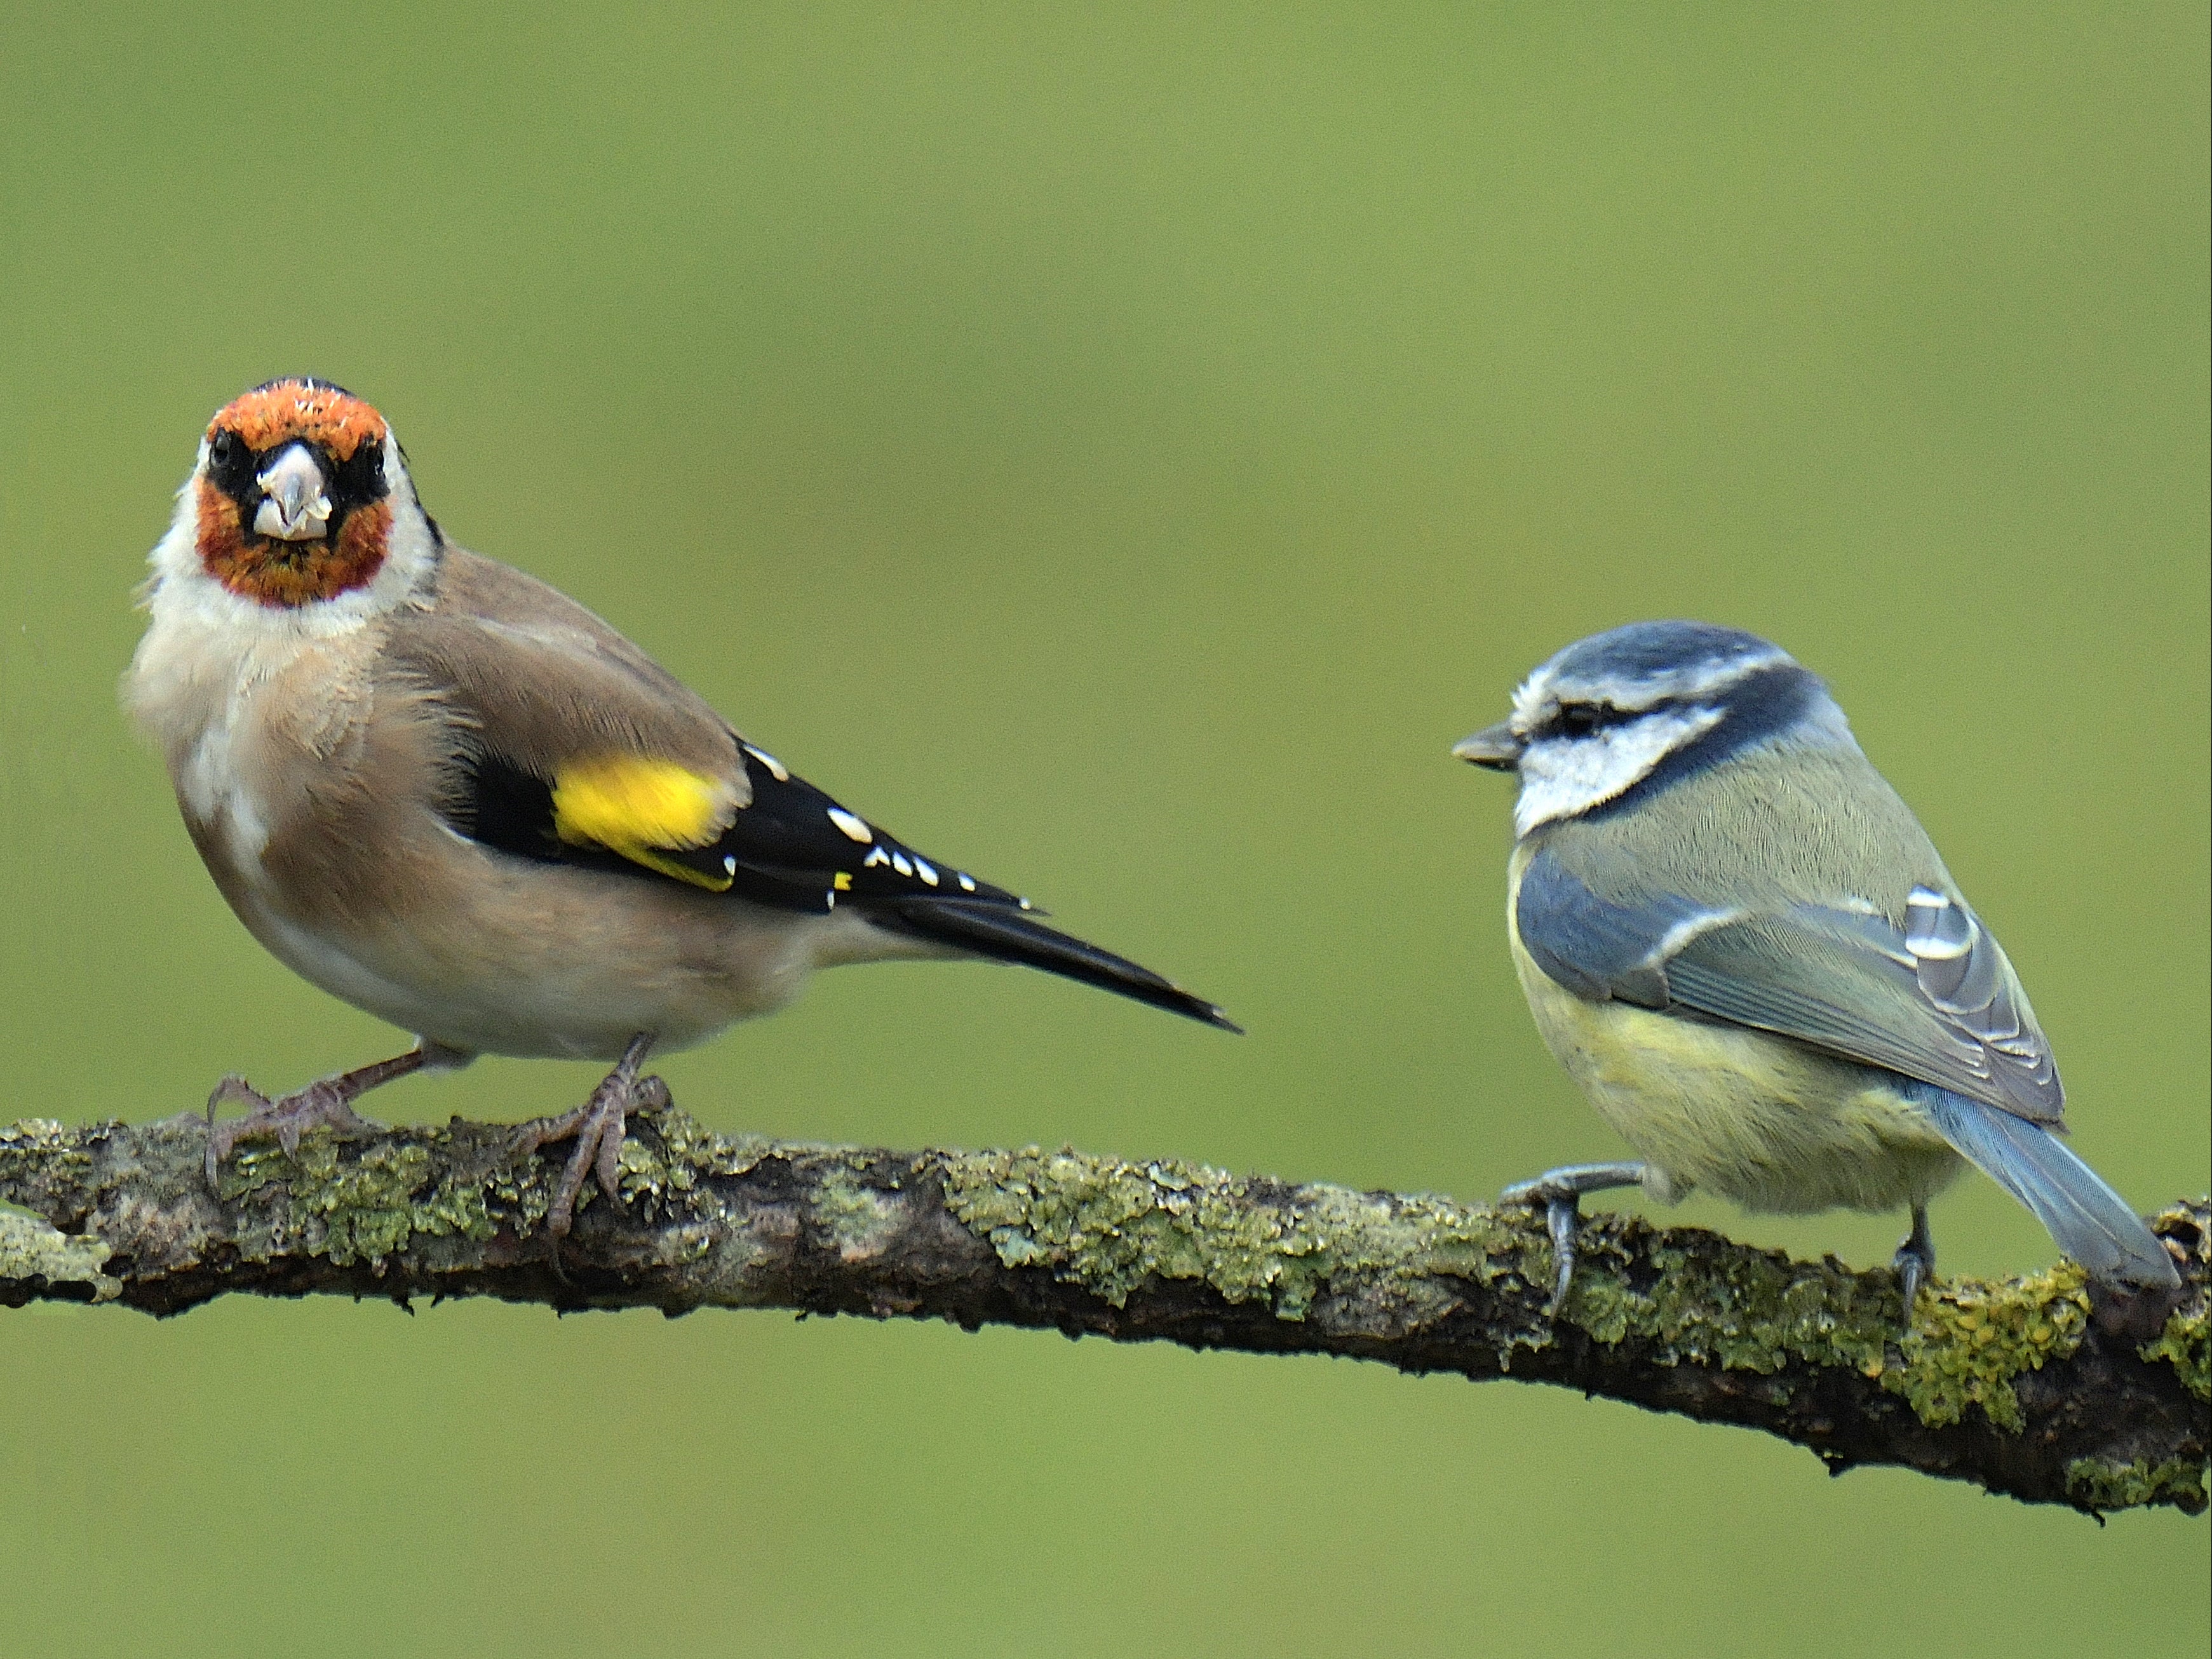 A goldfinch and a blue tit